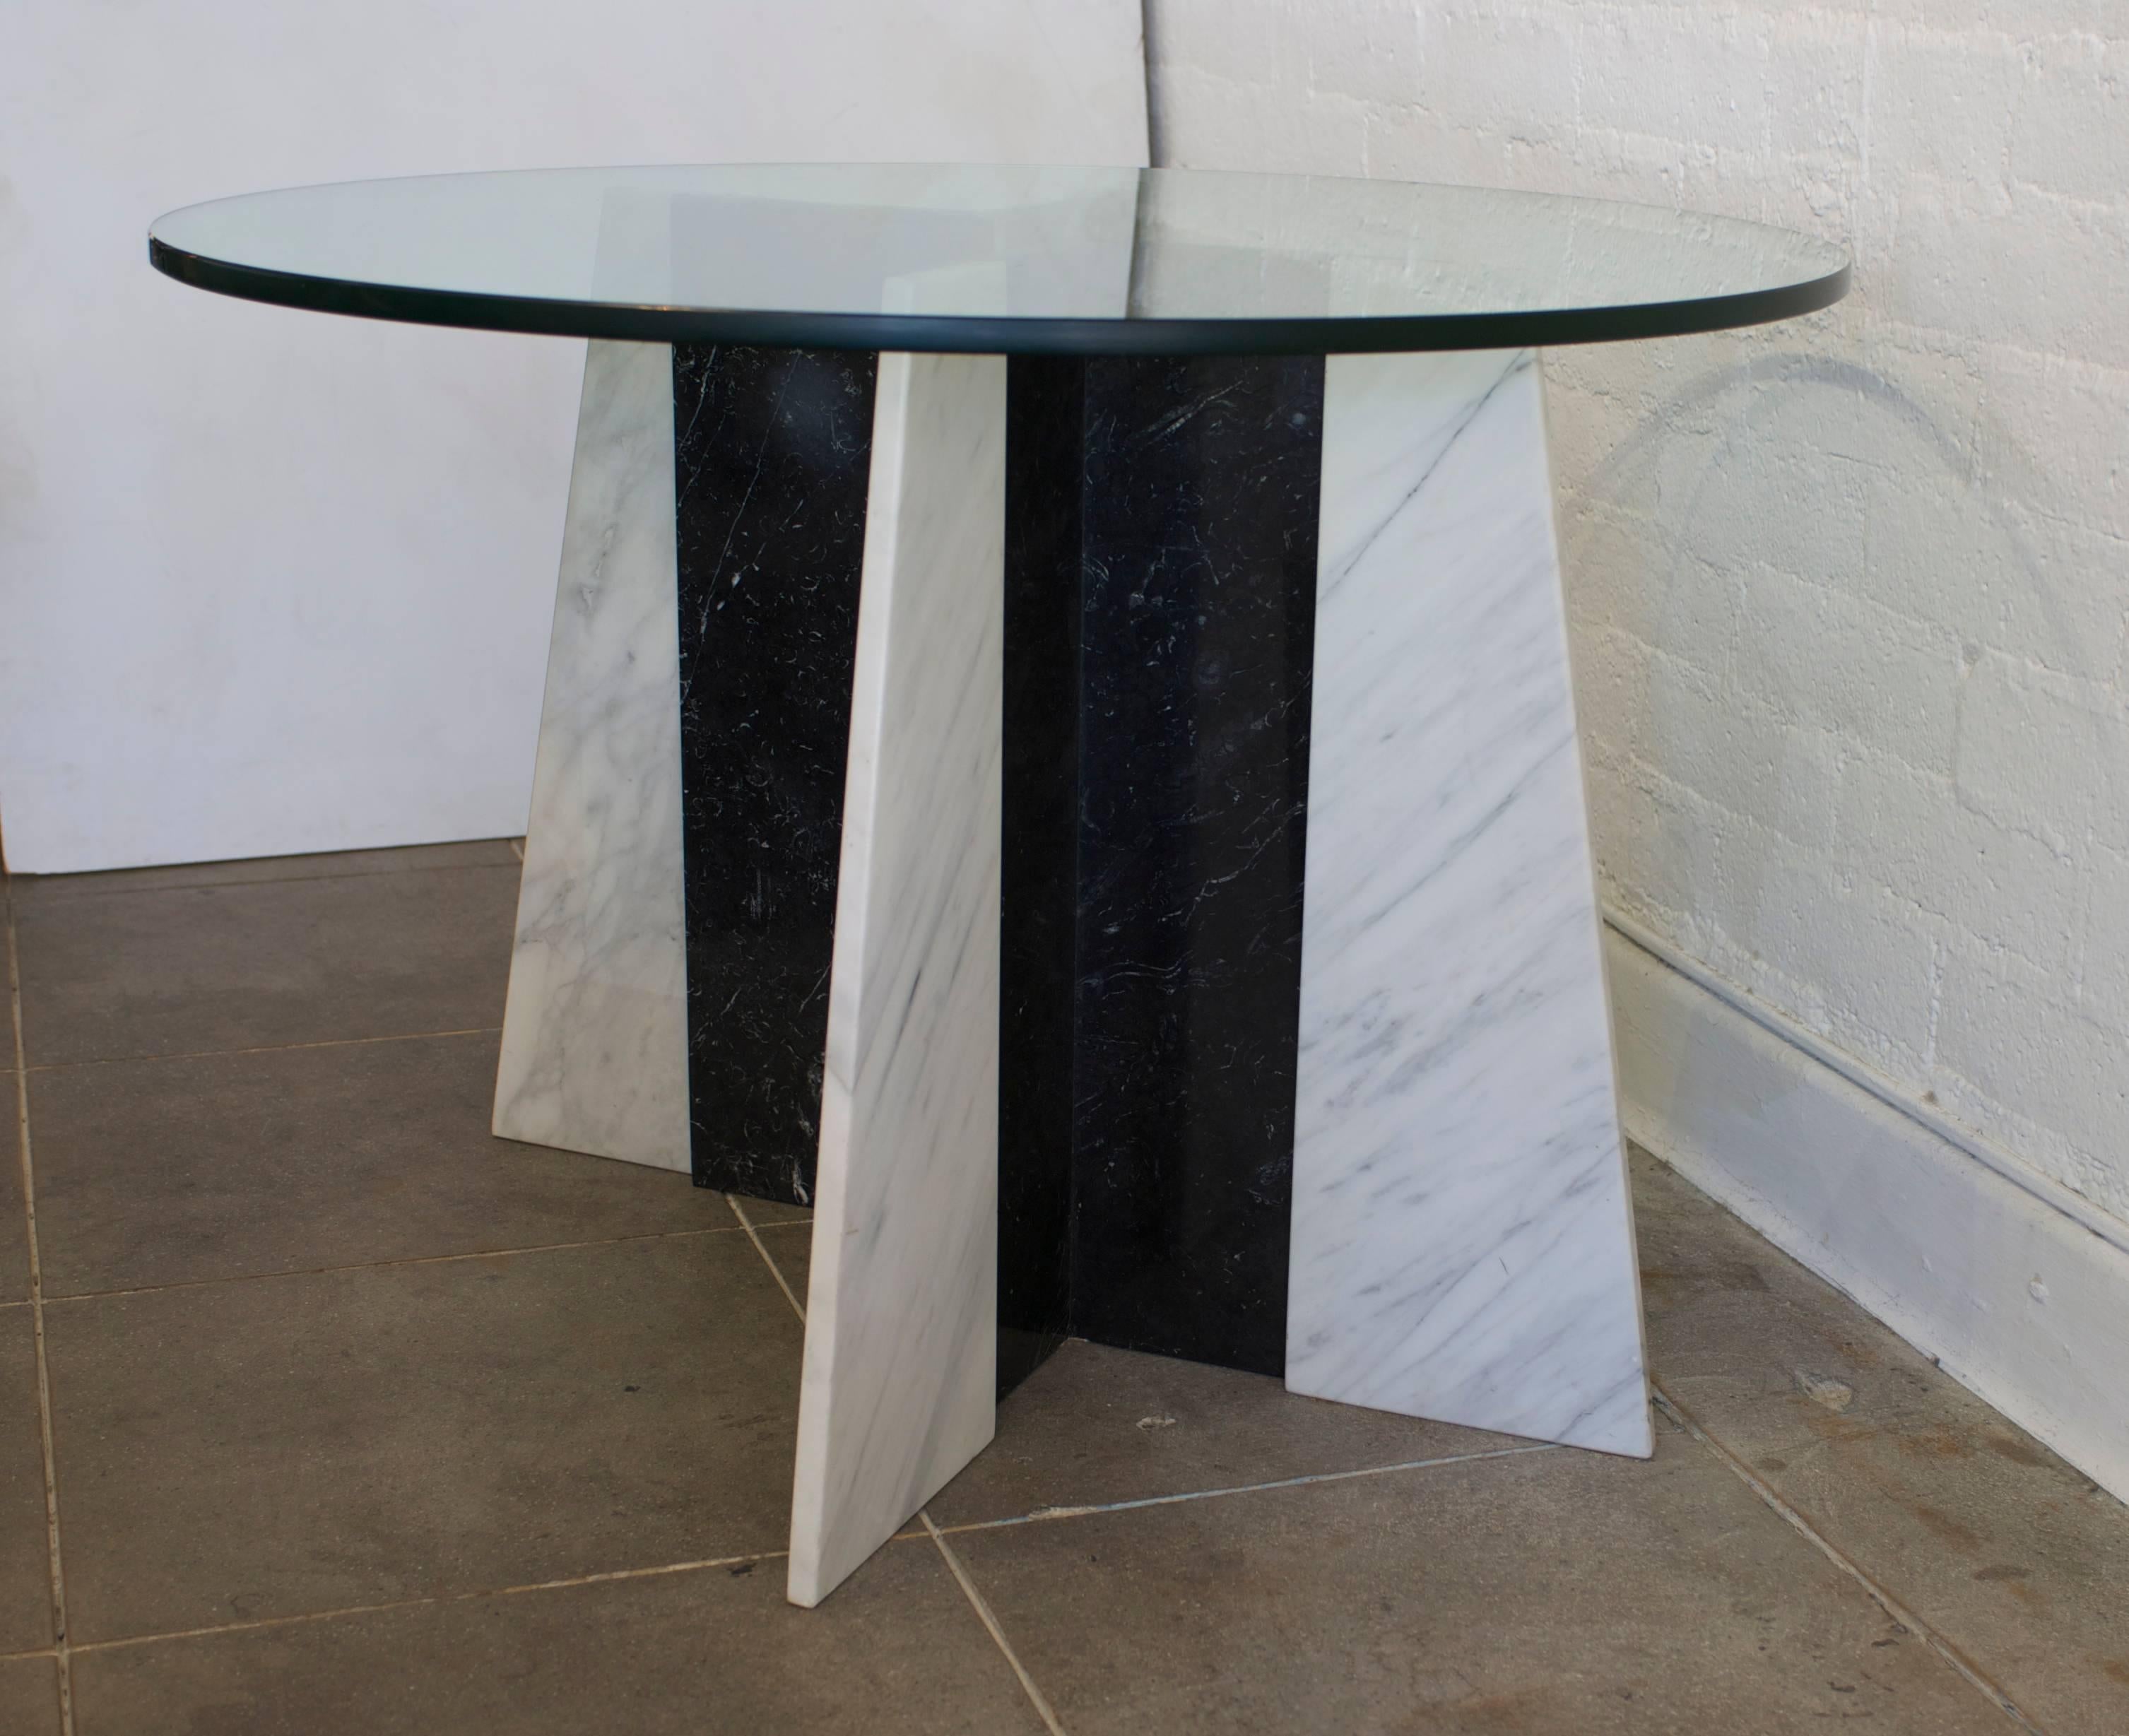 This versatile Postmodern marble table base currently has a round glass top on it but it could take a larger piece of glass in a rectangular shape to become a desk, console or larger table. The bases can be faced in either direction. The bases